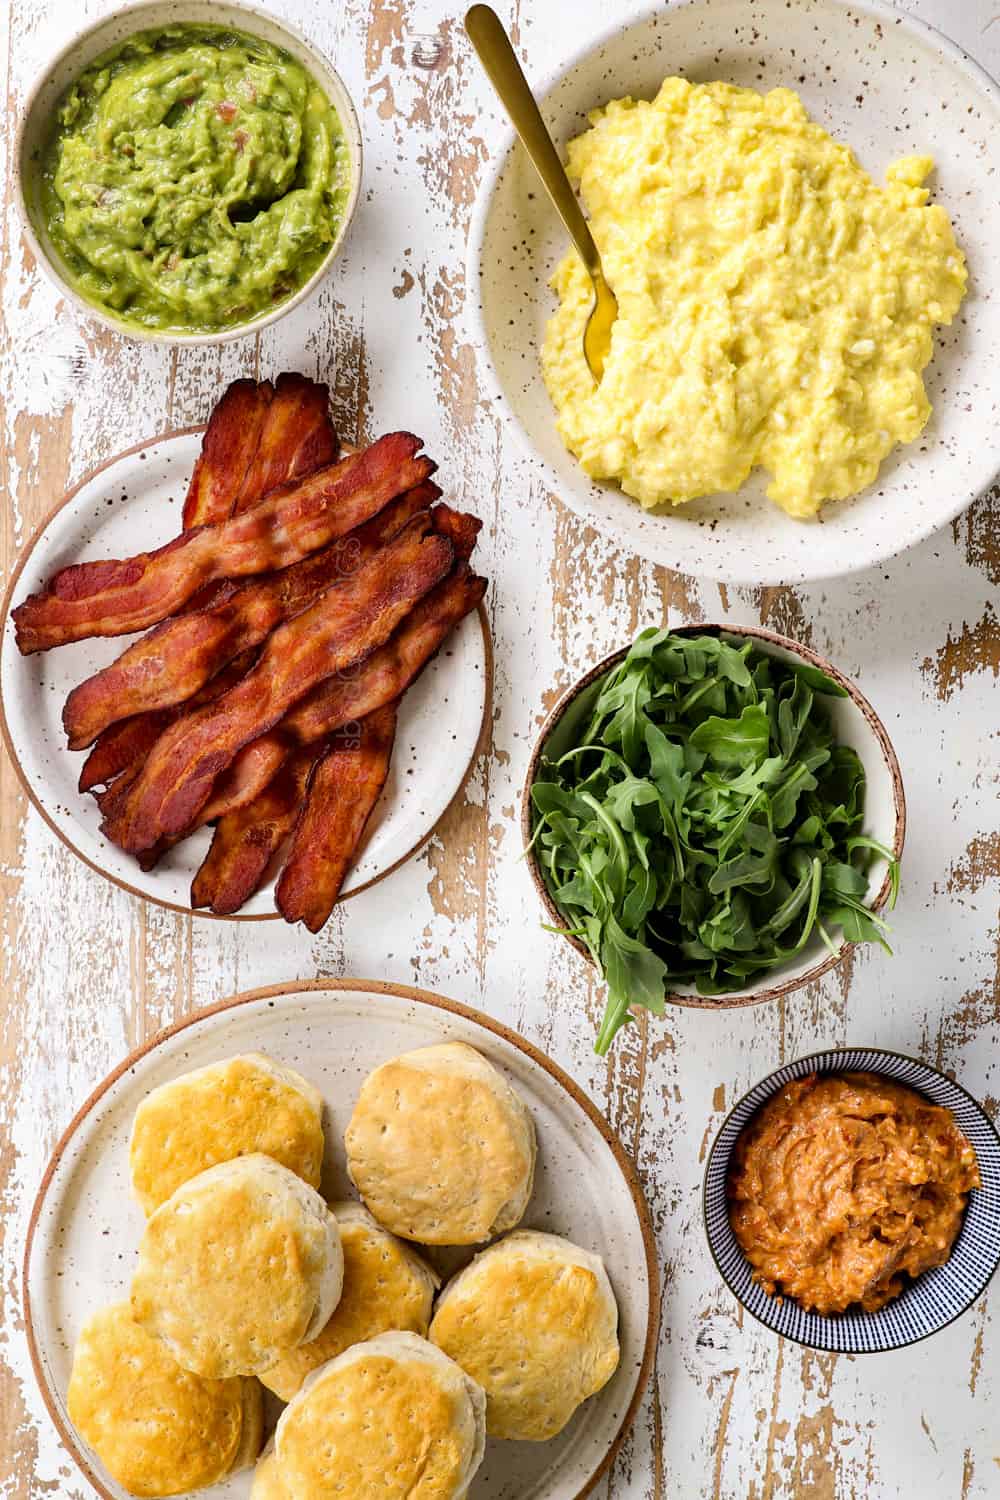 showing how to make breakfast sandwich recipe by showing ingredients: scrambled eggs, bacon, muffins, guacamole and arugula